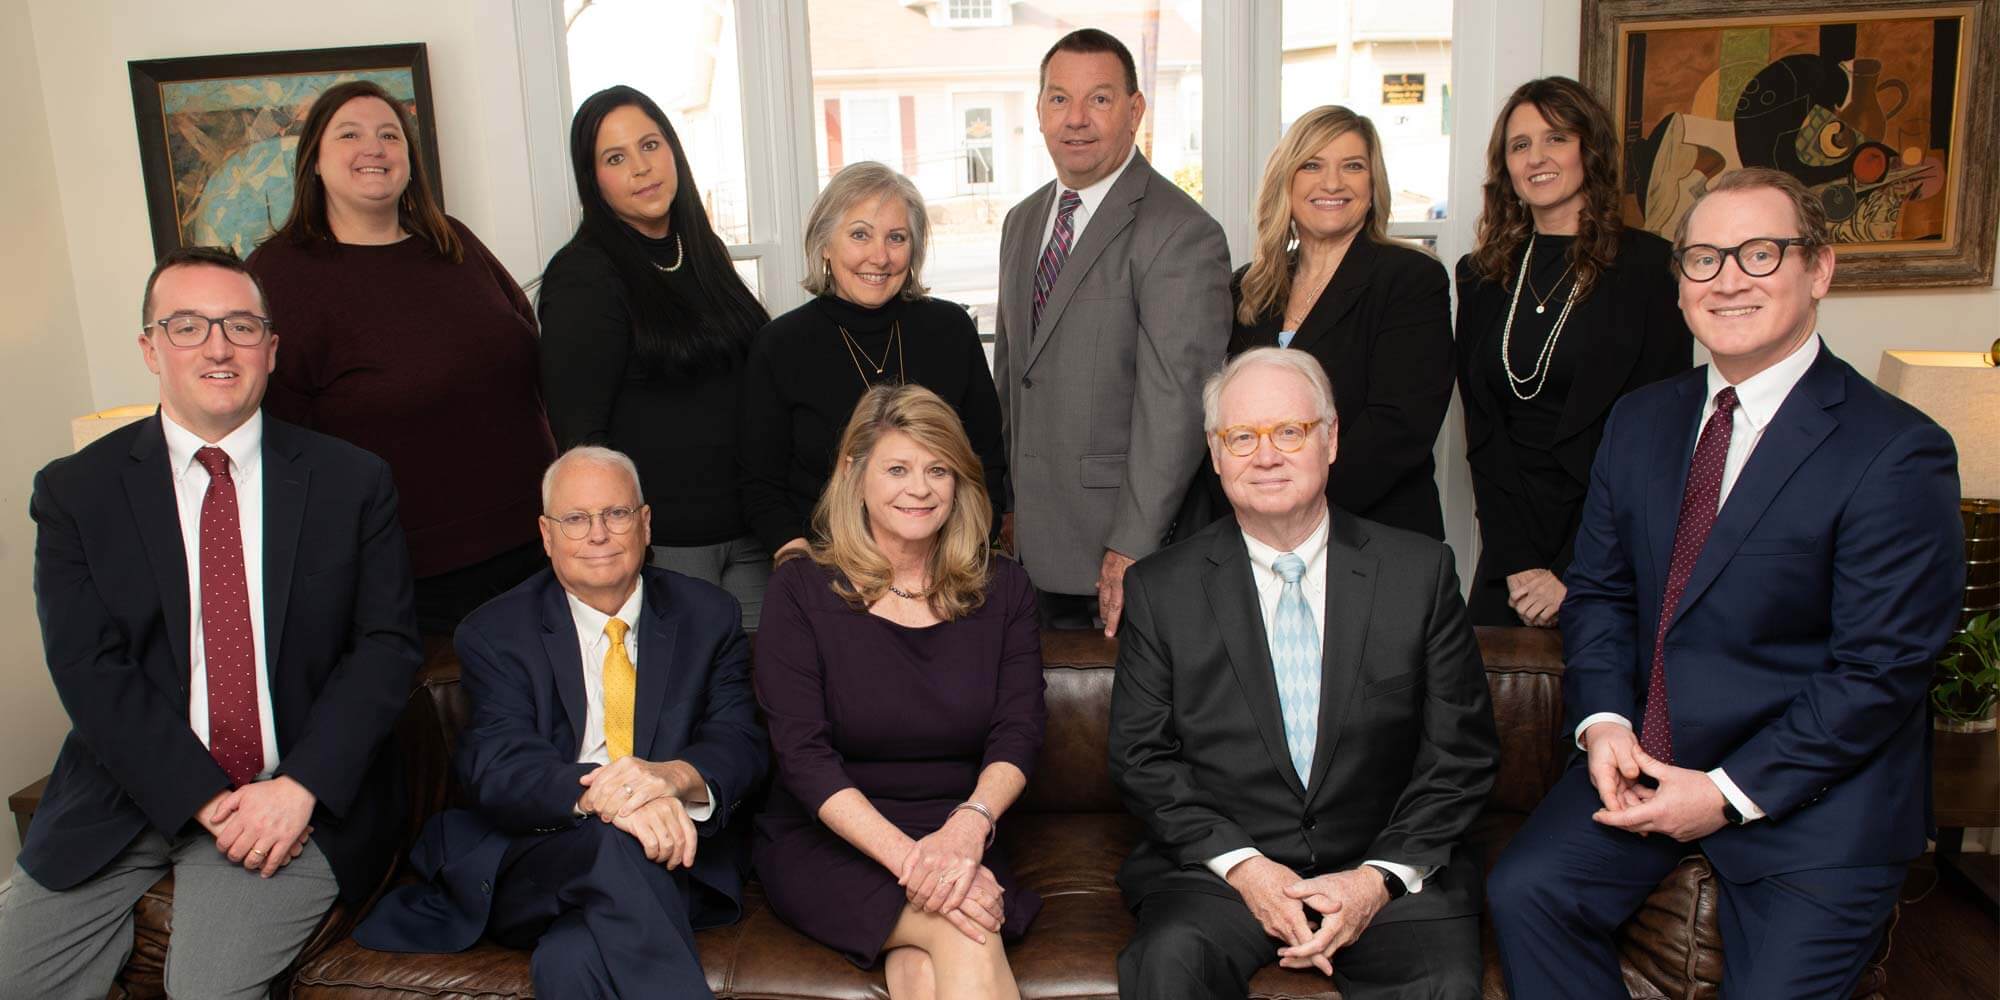 The attorneys and staff of Harbinson Parker